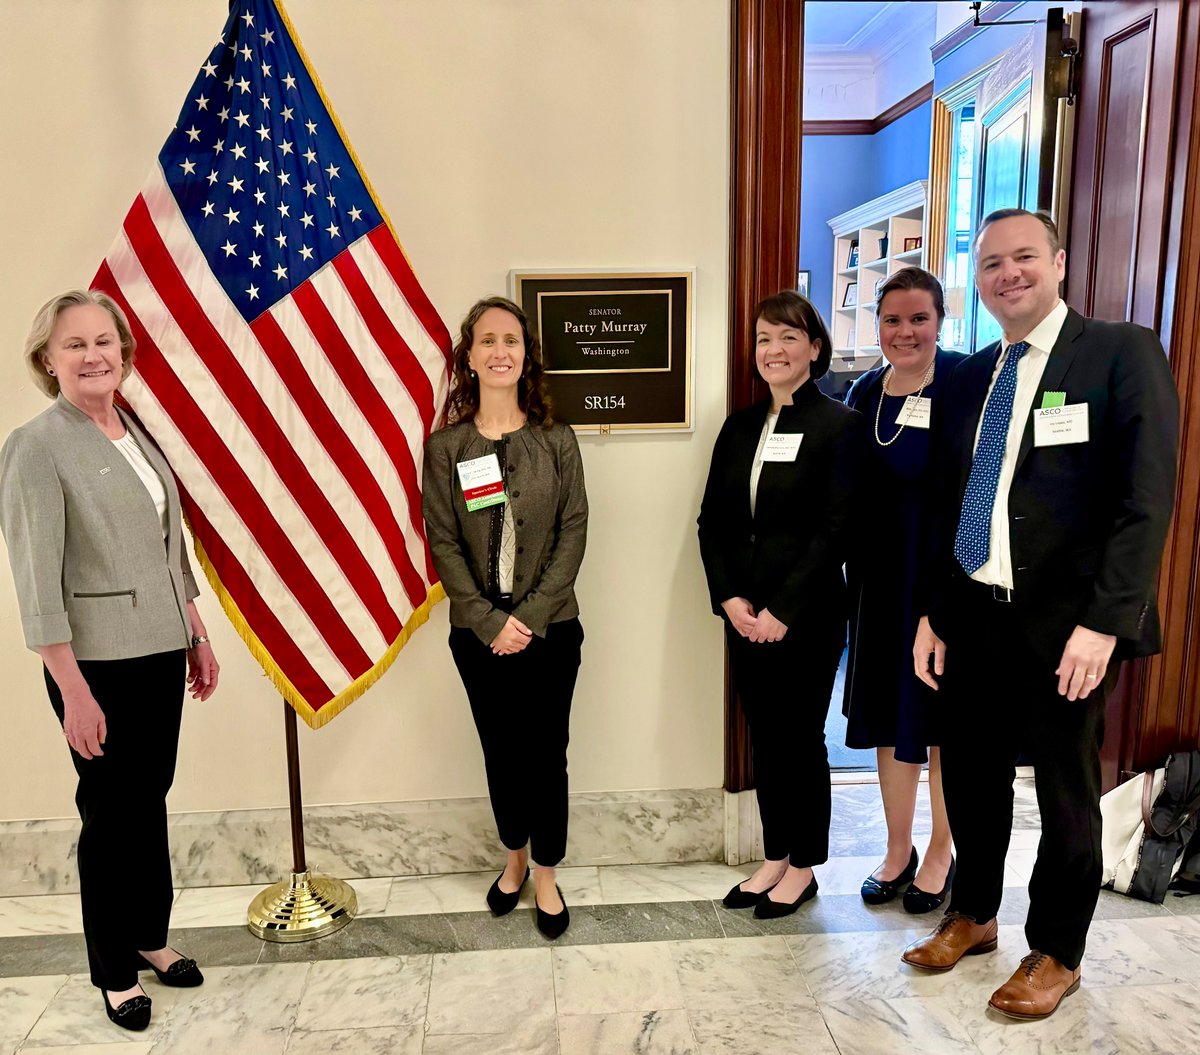 Thank you @PattyMurray @SenatorCantwell for meeting w/ WA oncologists to discuss extending telemedicine, mitigating drug shortages, and increase cancer research funding! @jrgralow @drblairirwin #ASCOAdvocacySummit